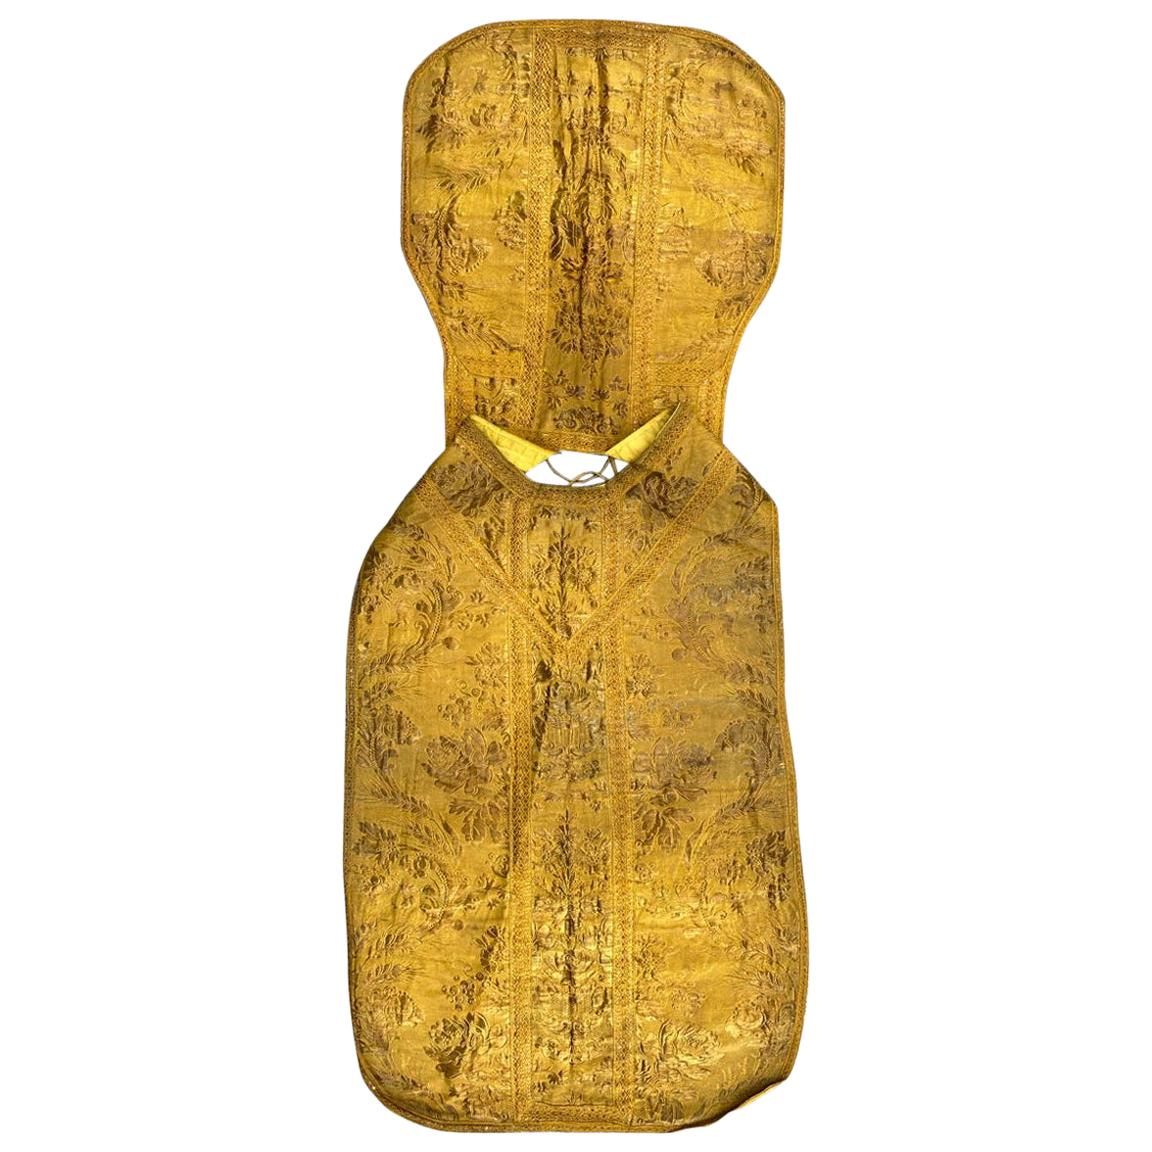 Bobyrug’s Antique French Golden Chasuble